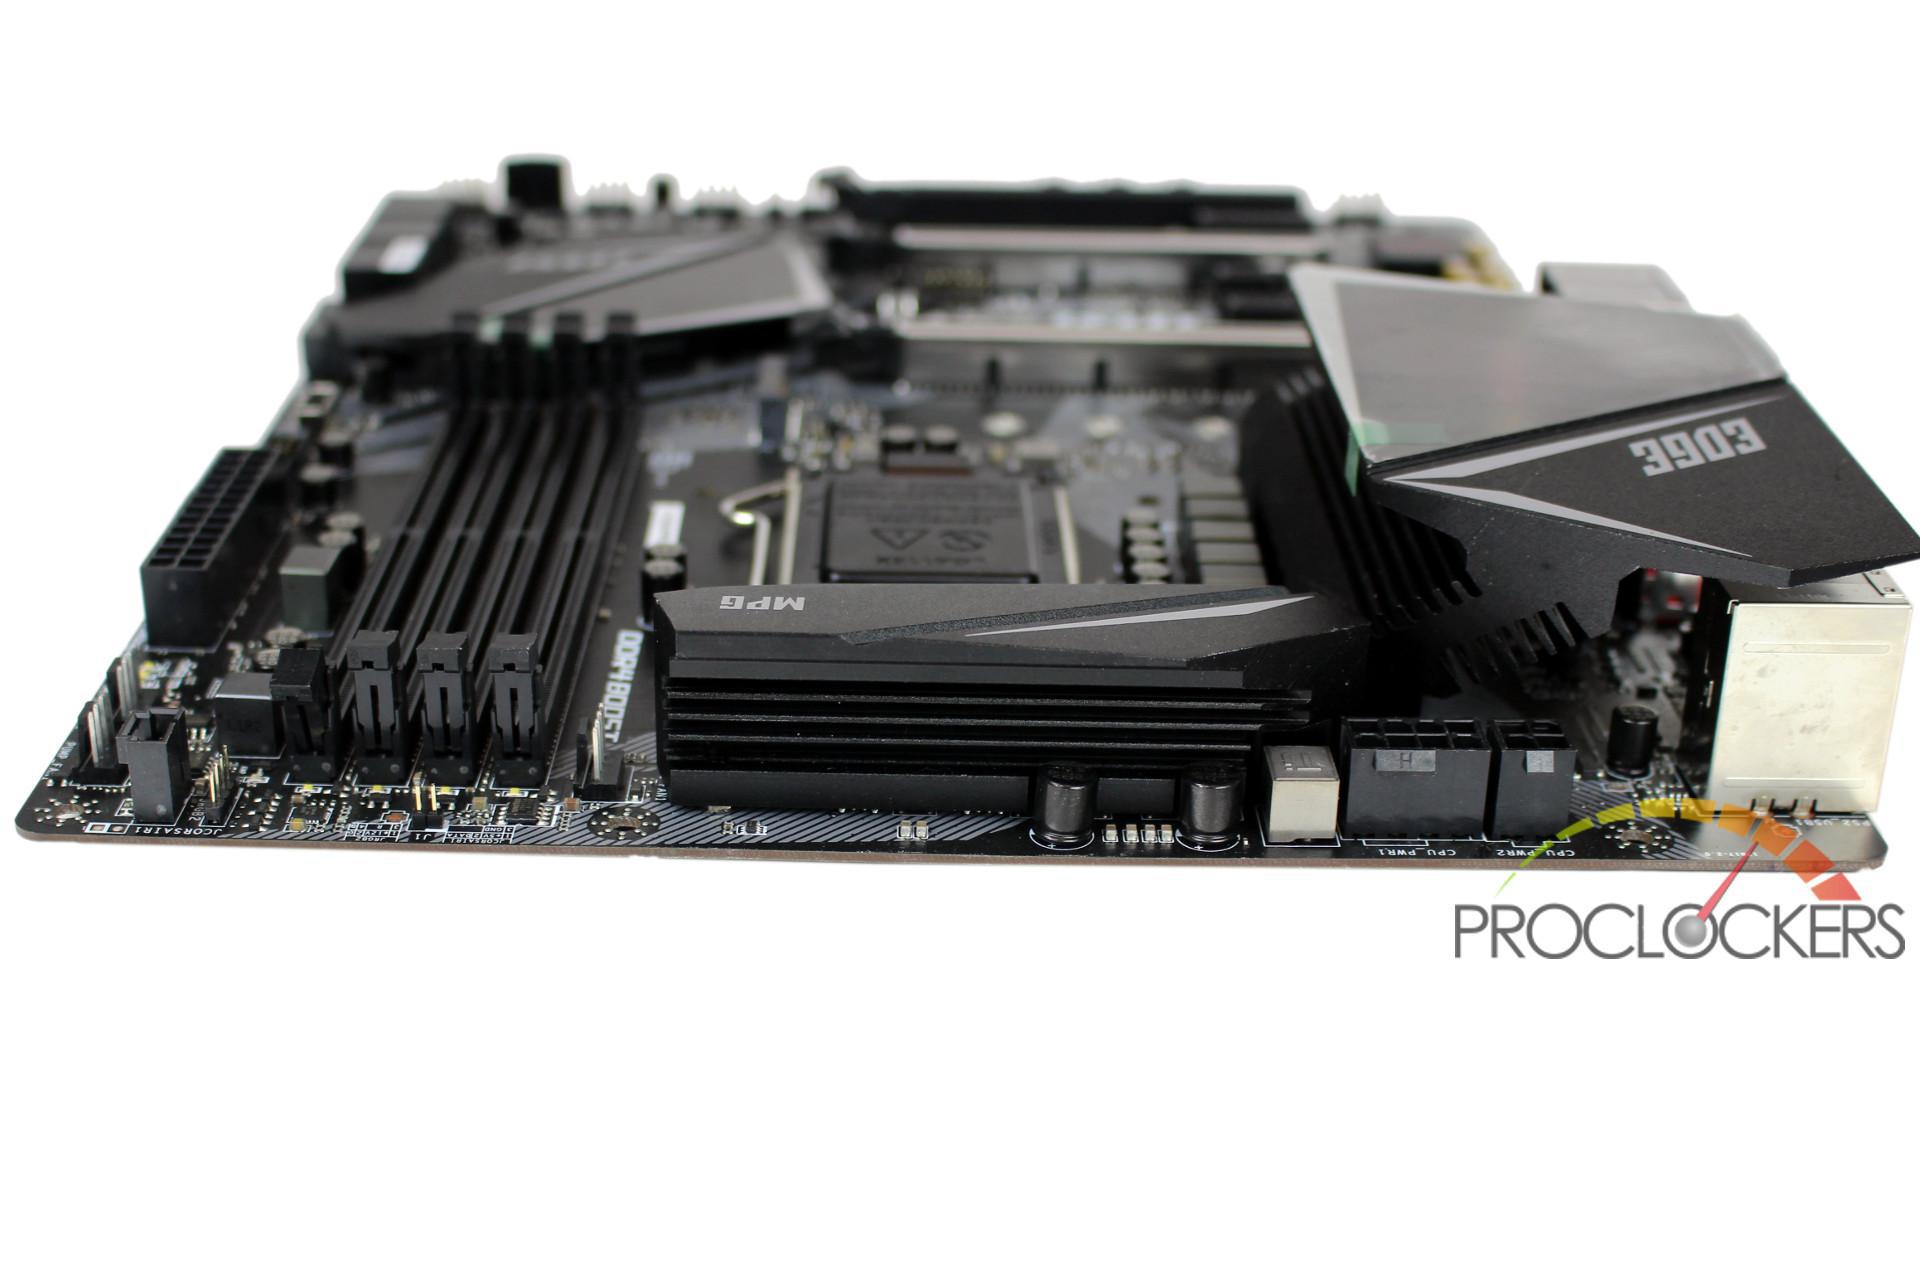 Msi Mpg Z390 Gaming Edge Ac Motherboard Review Page 4 Of 9 Proclockers